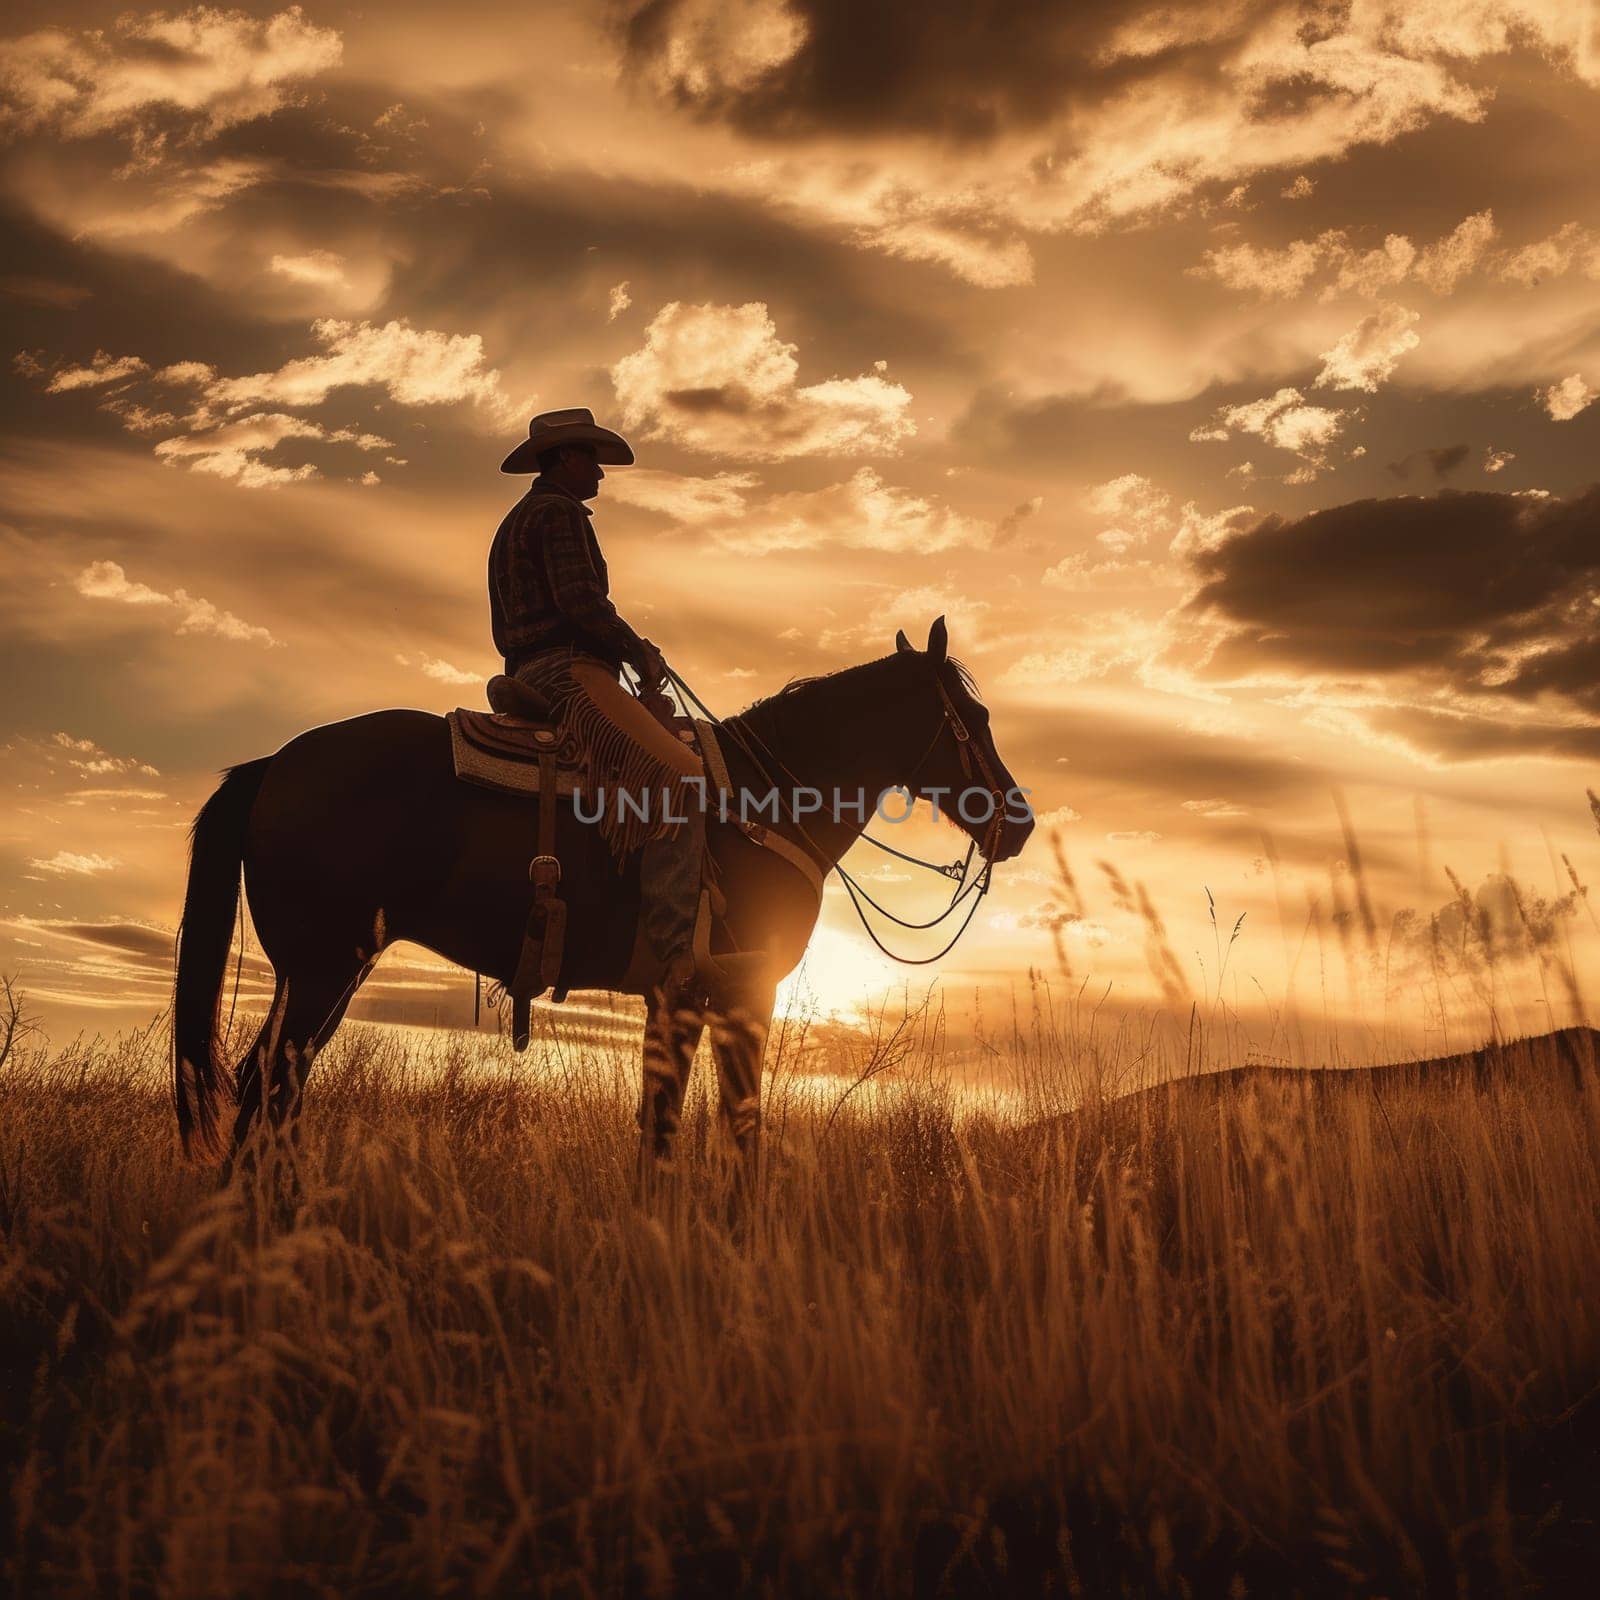 Silhouette of a cowboy on horseback against a striking sunset over the open field